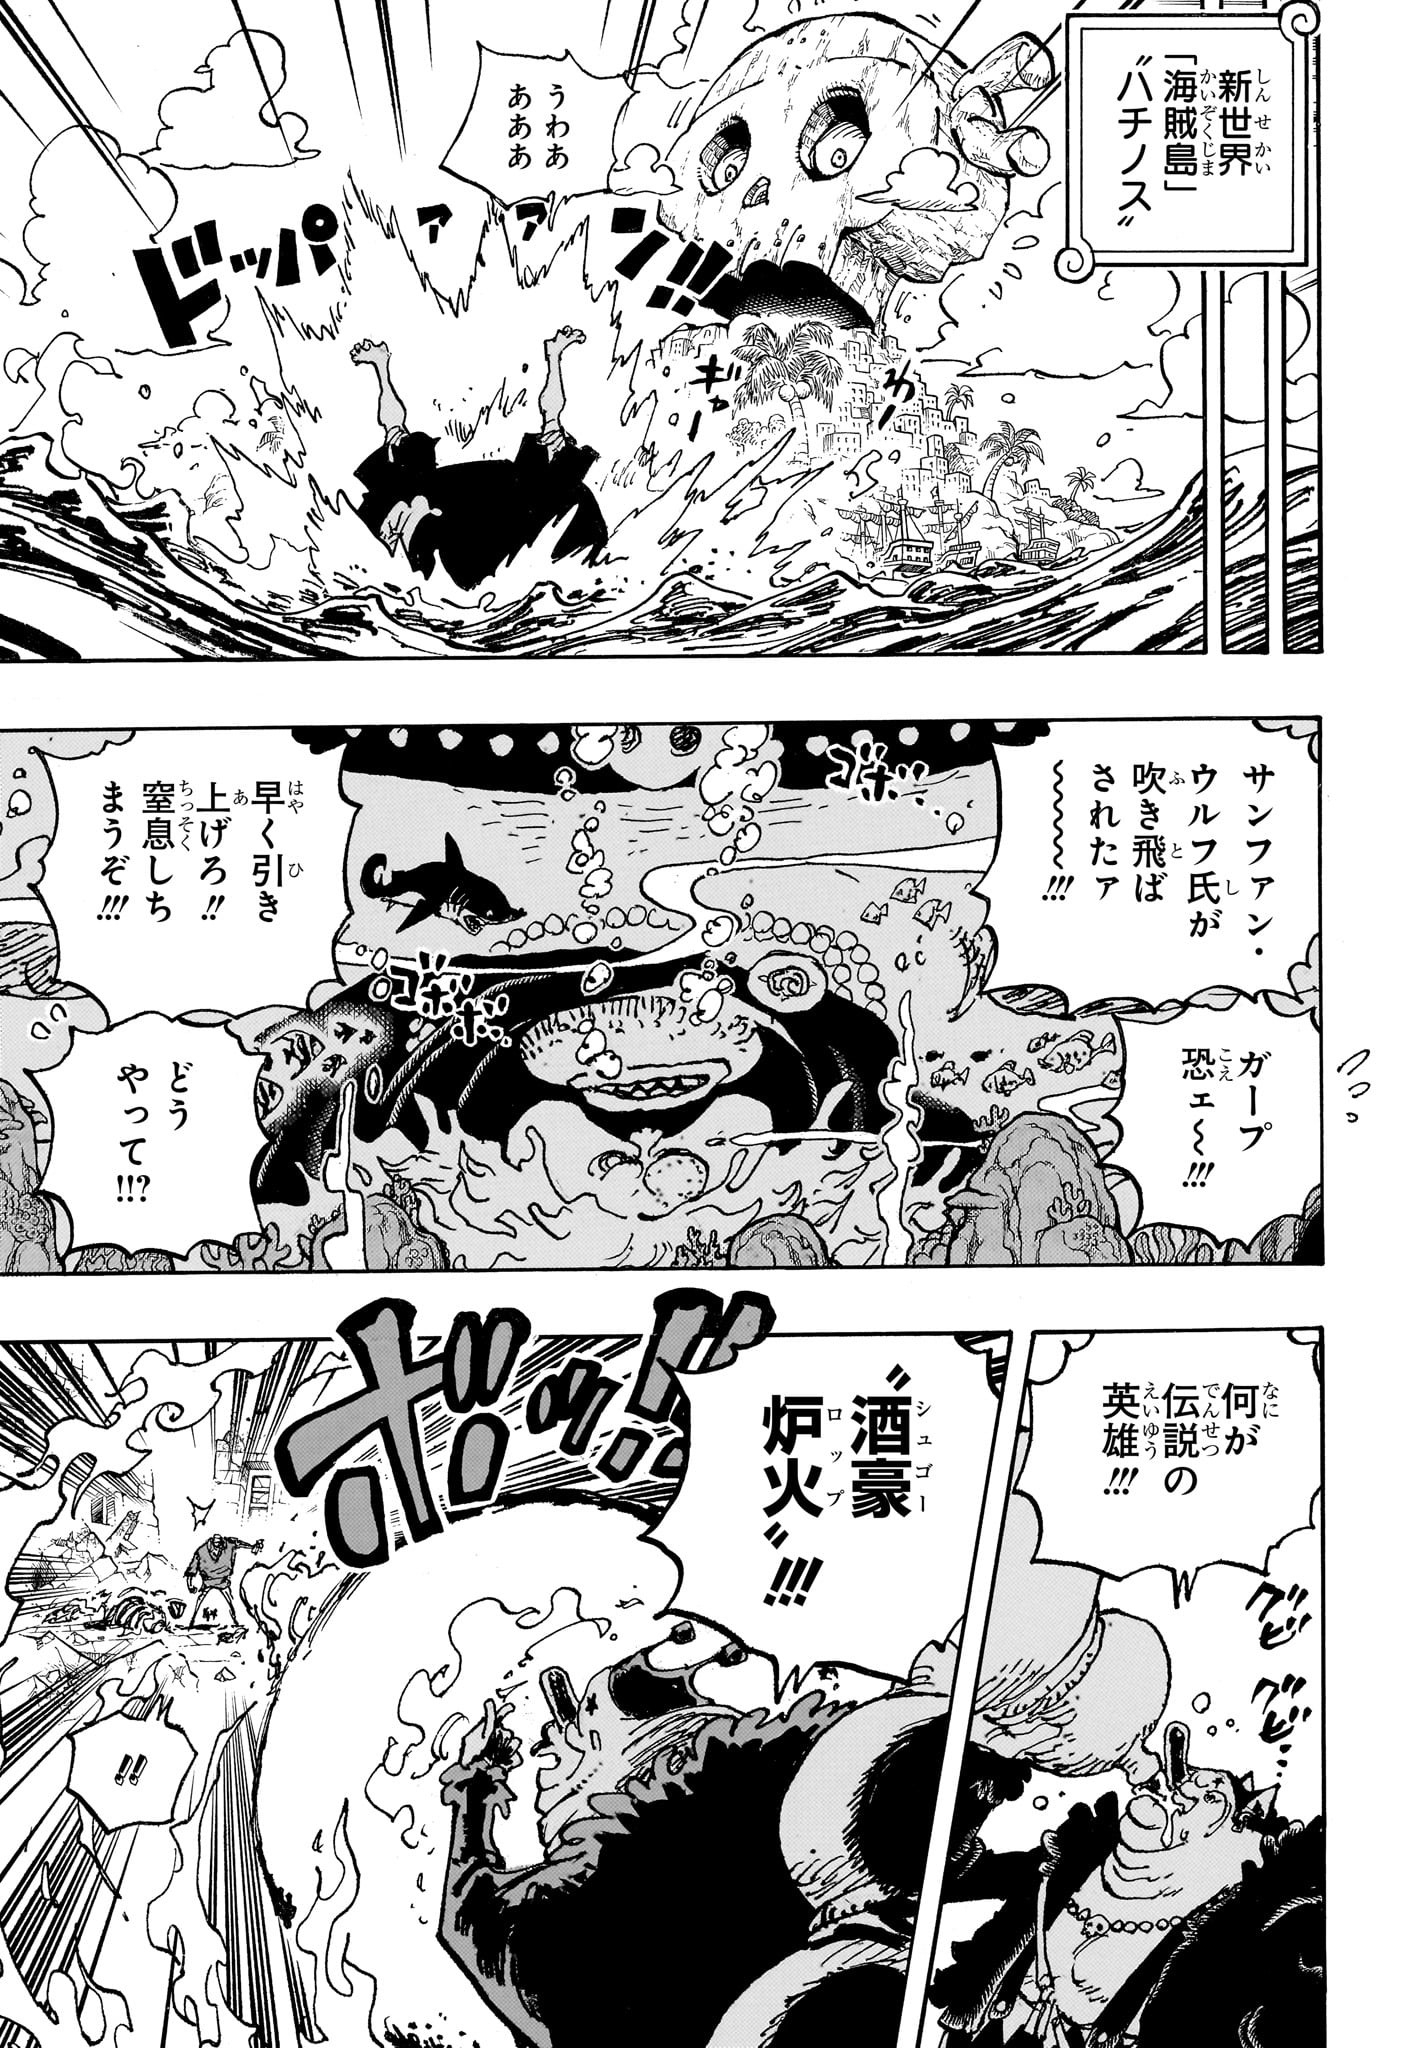 One Piece - Chapter 1087 - Page 3